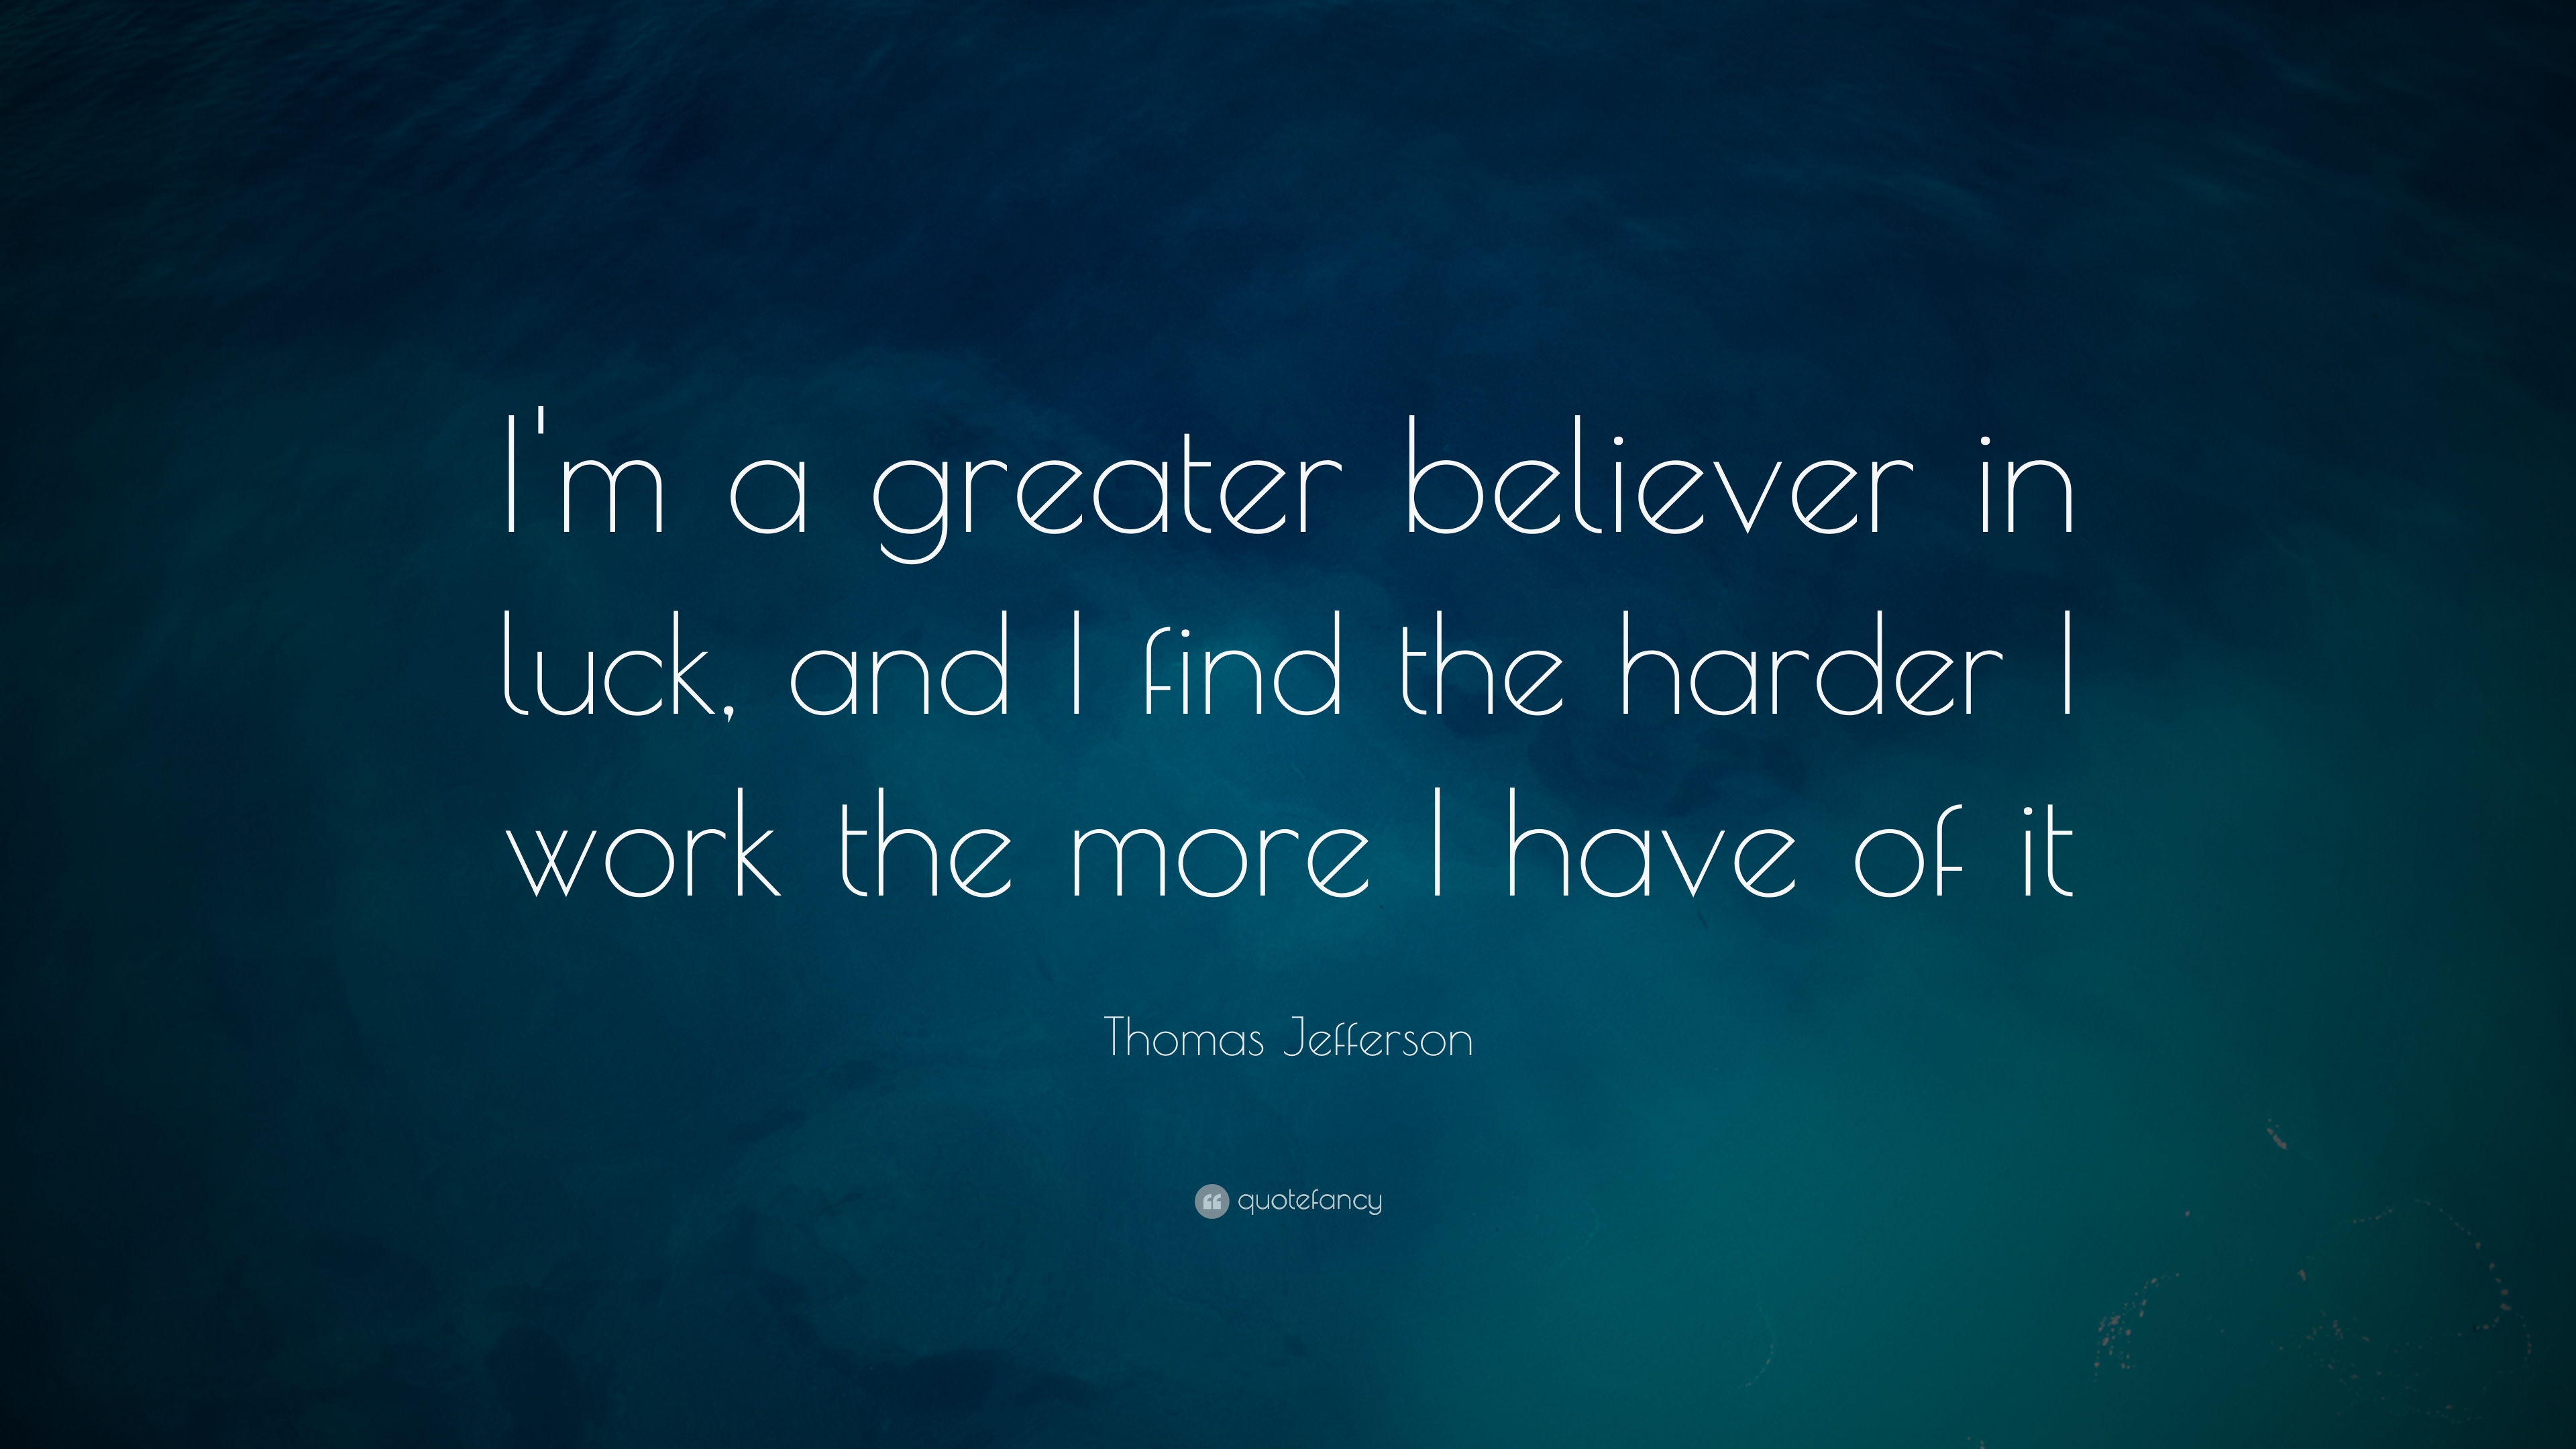 Thomas Jefferson Quote: “I'm a greater believer in luck, and I ...